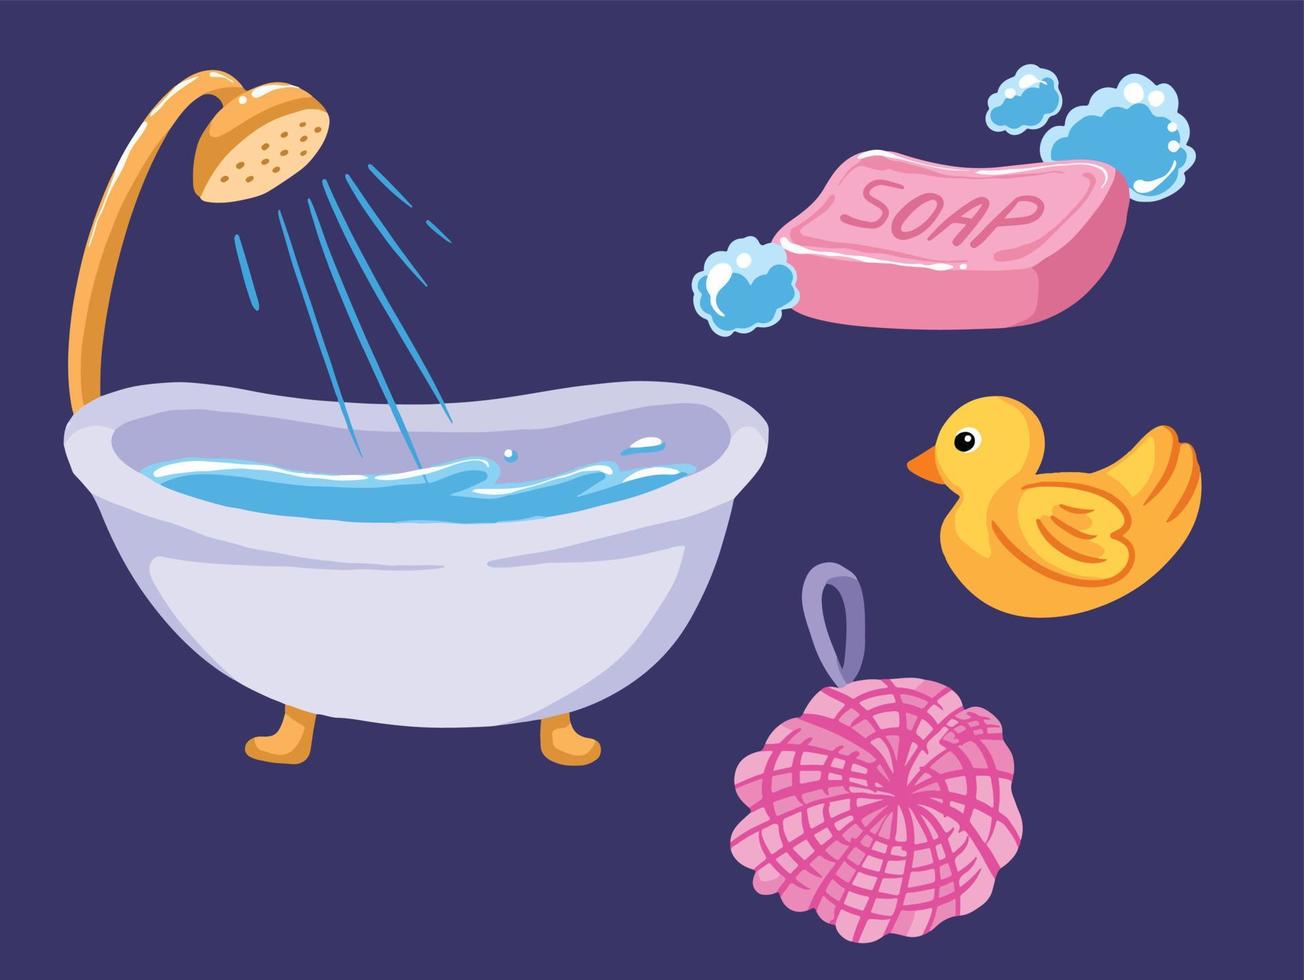 Bathroom set collection vector illustration with flat cartoon style drawing. From bath tub, rubber duck, soap with bubbles, and pink scrub.